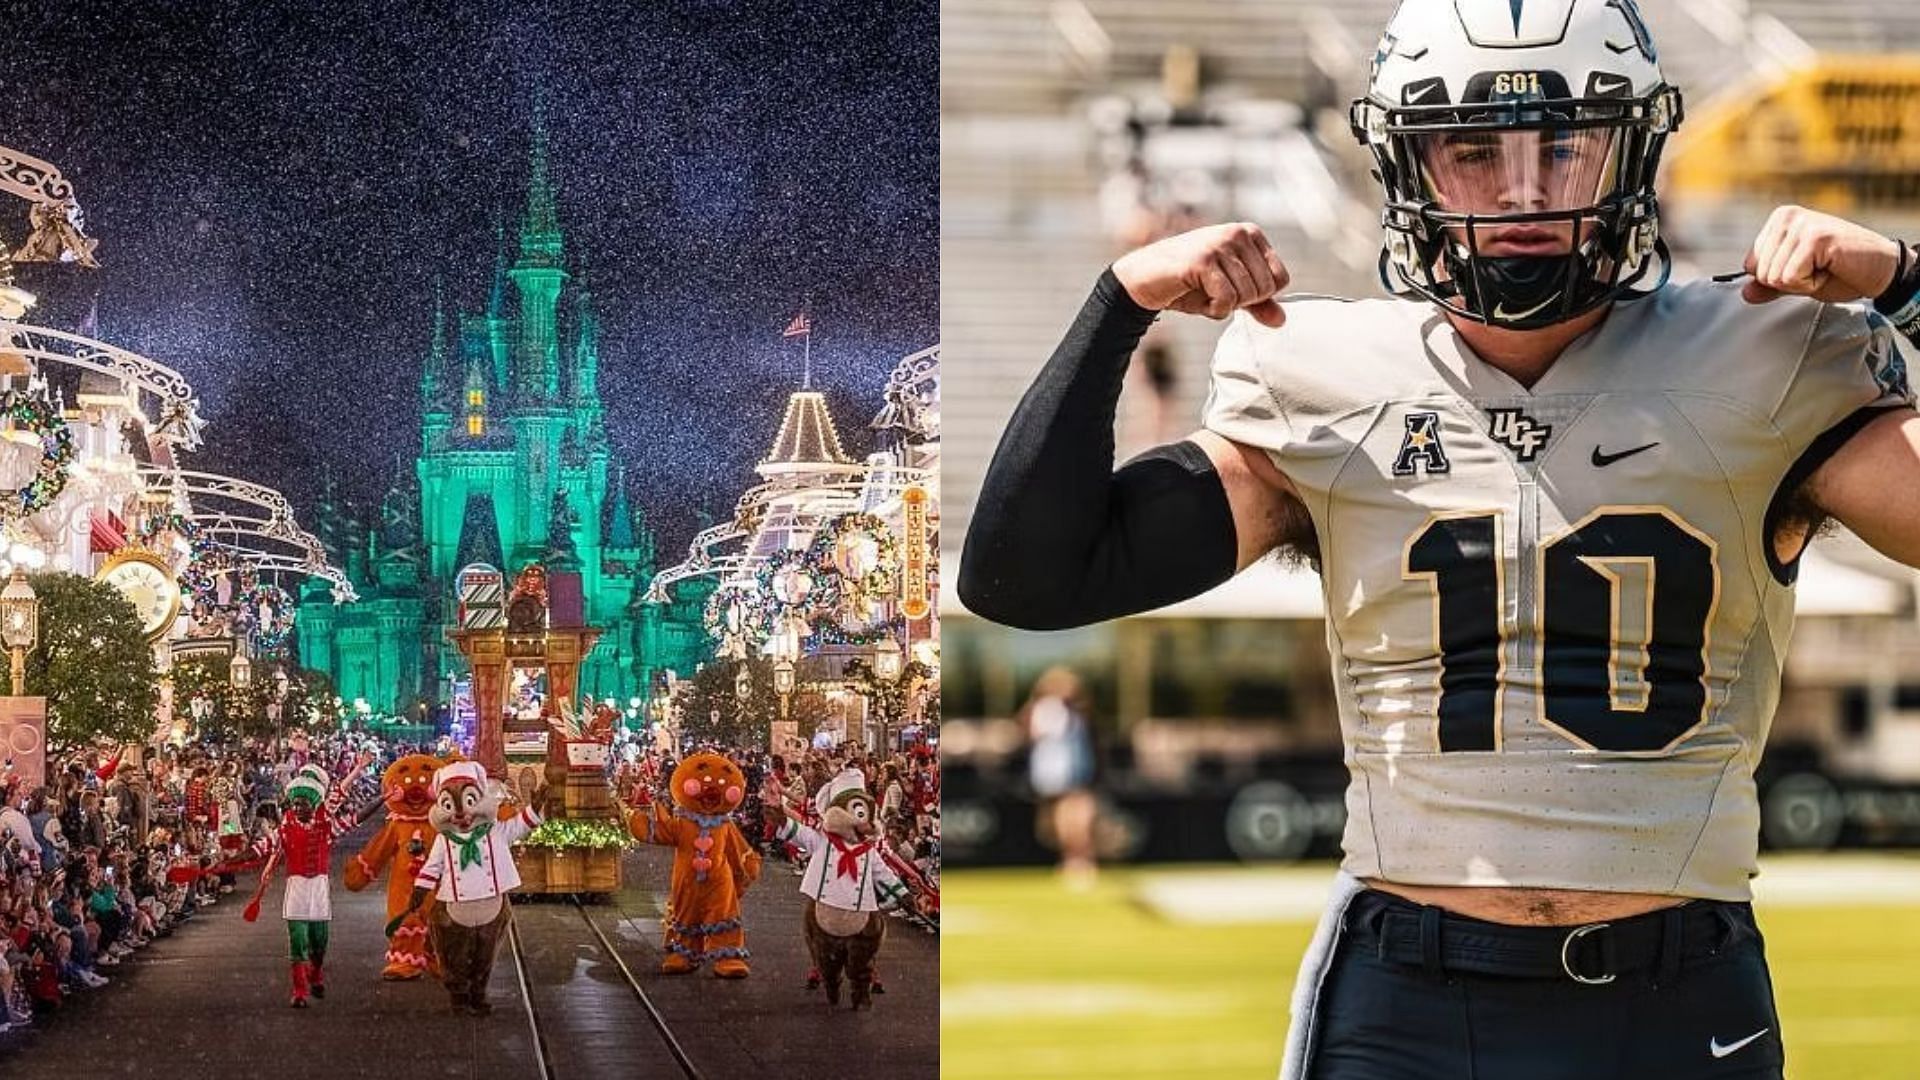 UCF football player caught lying about his status in a Disney World video 